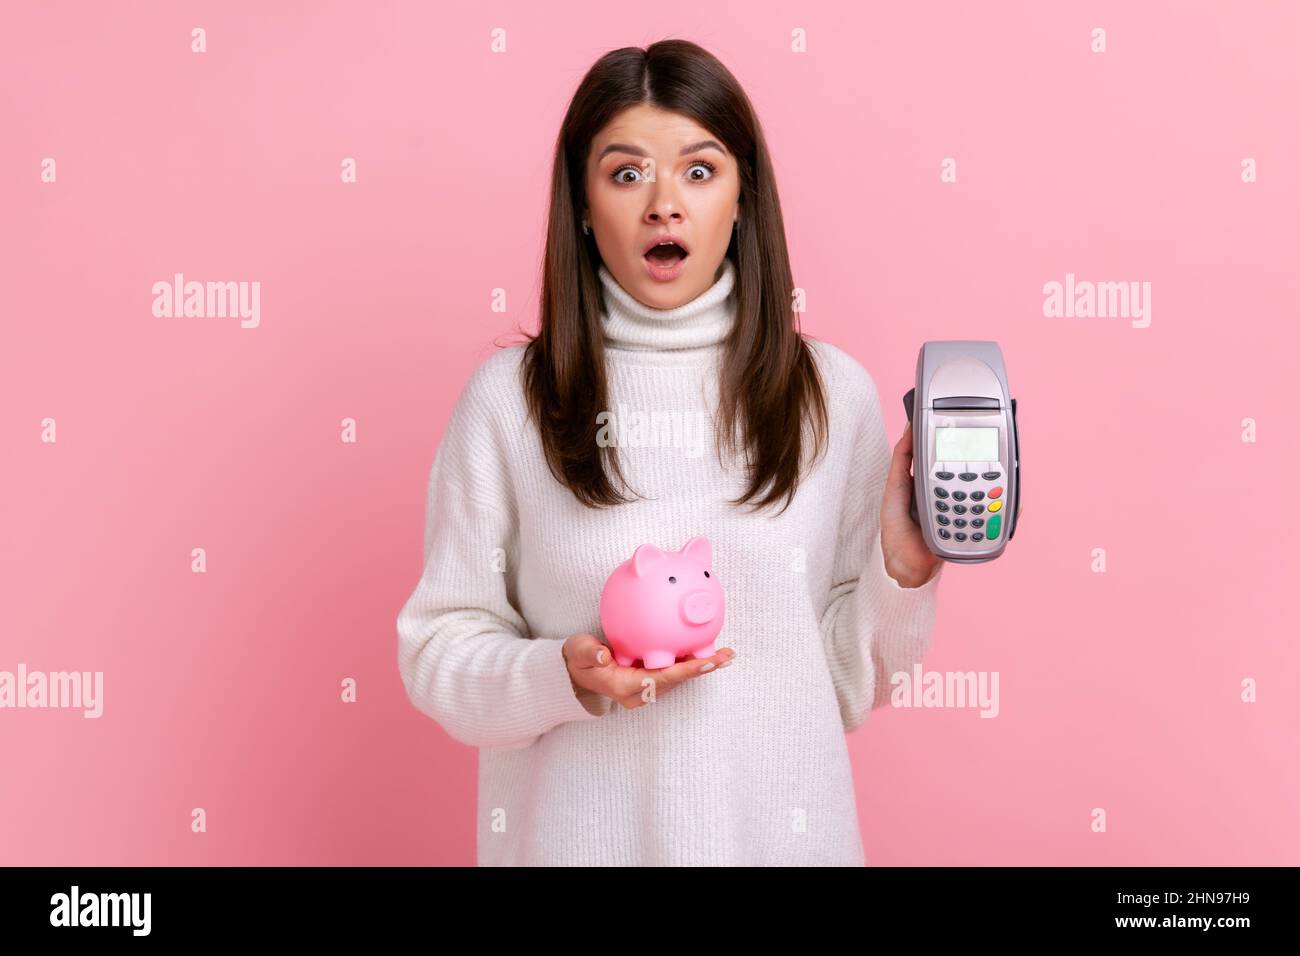 Shocked girl with dark hair showing pos payment terminal and piggybank, using cashless payments, nfc, wearing white casual style sweater. Indoor studio shot isolated on pink background. Stock Photo